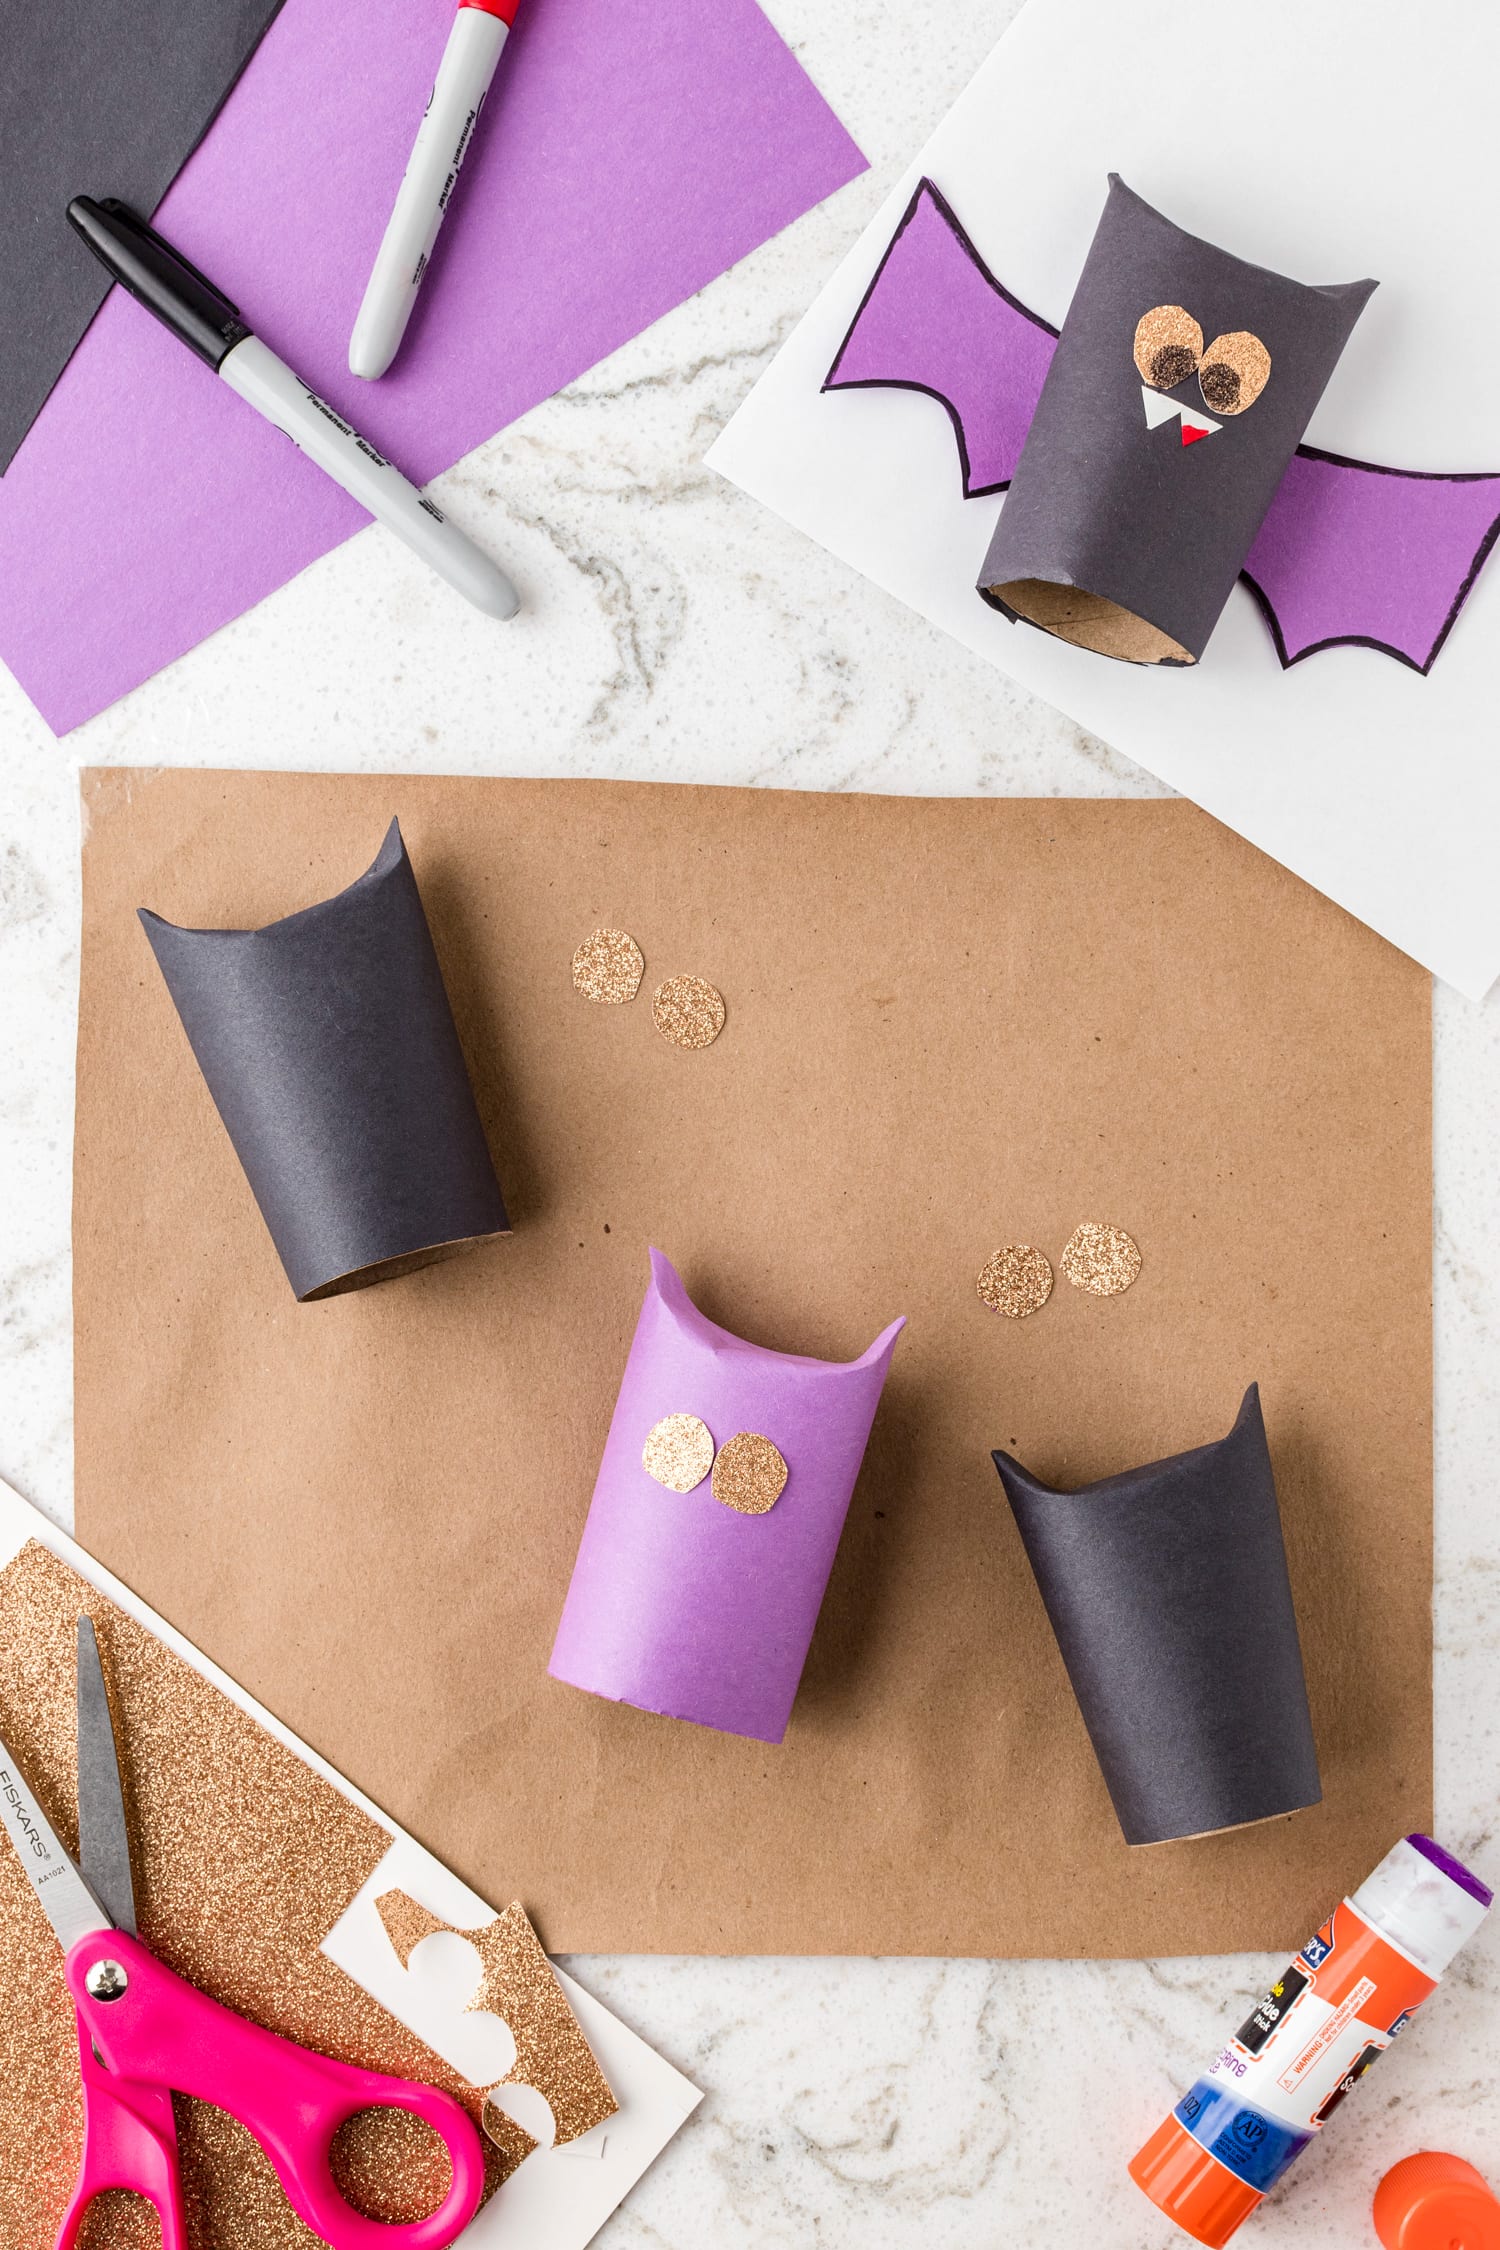 Putting eyes on bat craft made of paper towel roll